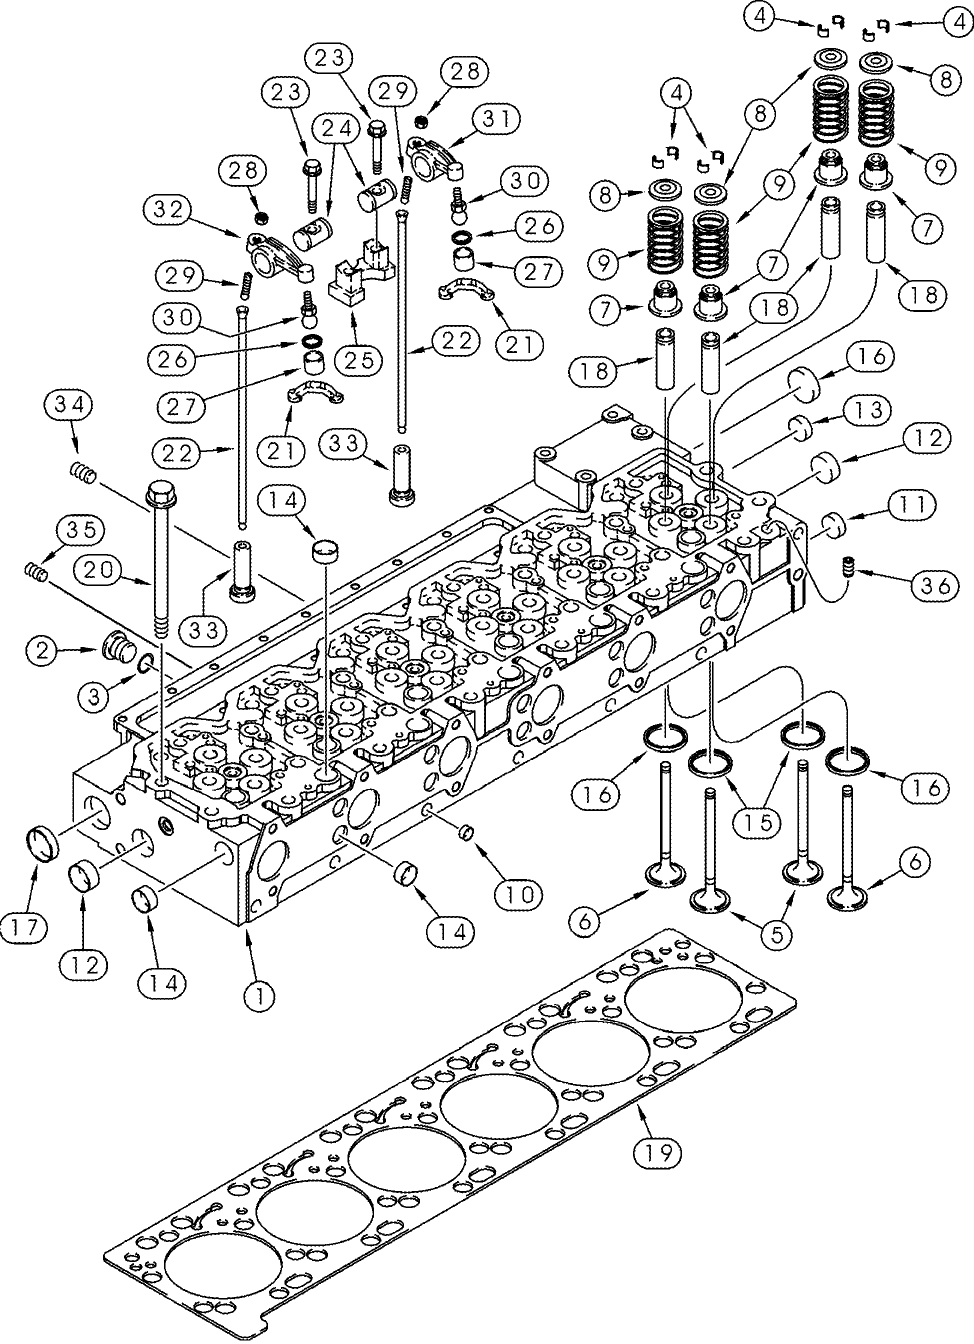 02 -20 CYLINDER HEAD - VALVE MECHANISM (6TAA-8304 / 6TAA-9004 EMISSIONS CERTIFIED ENGINE)